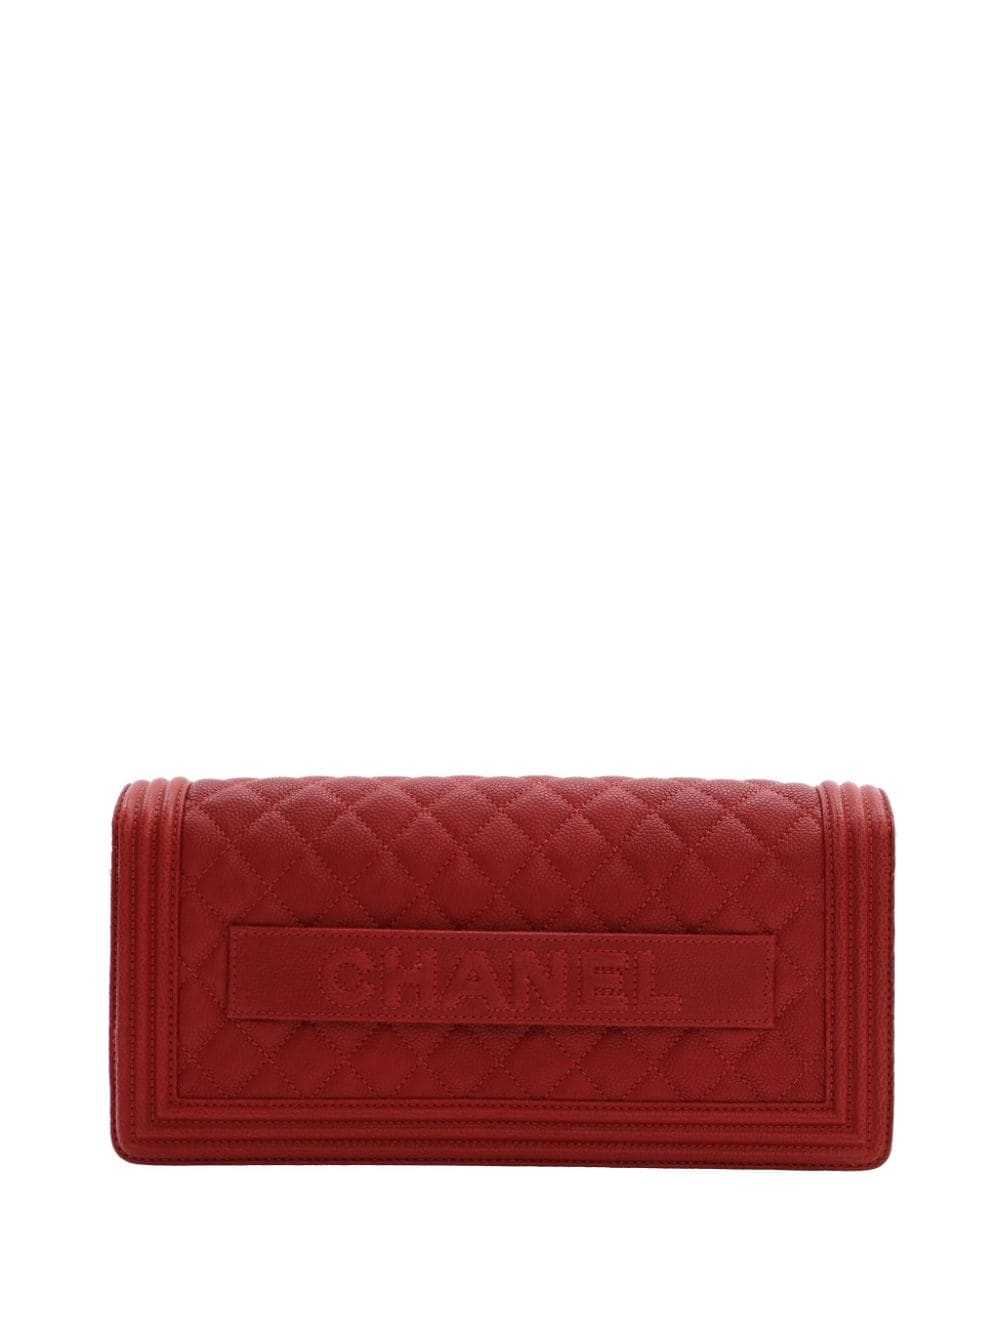 CHANEL Pre-Owned 2016-2017 Quilted Caviar Boy clu… - image 2